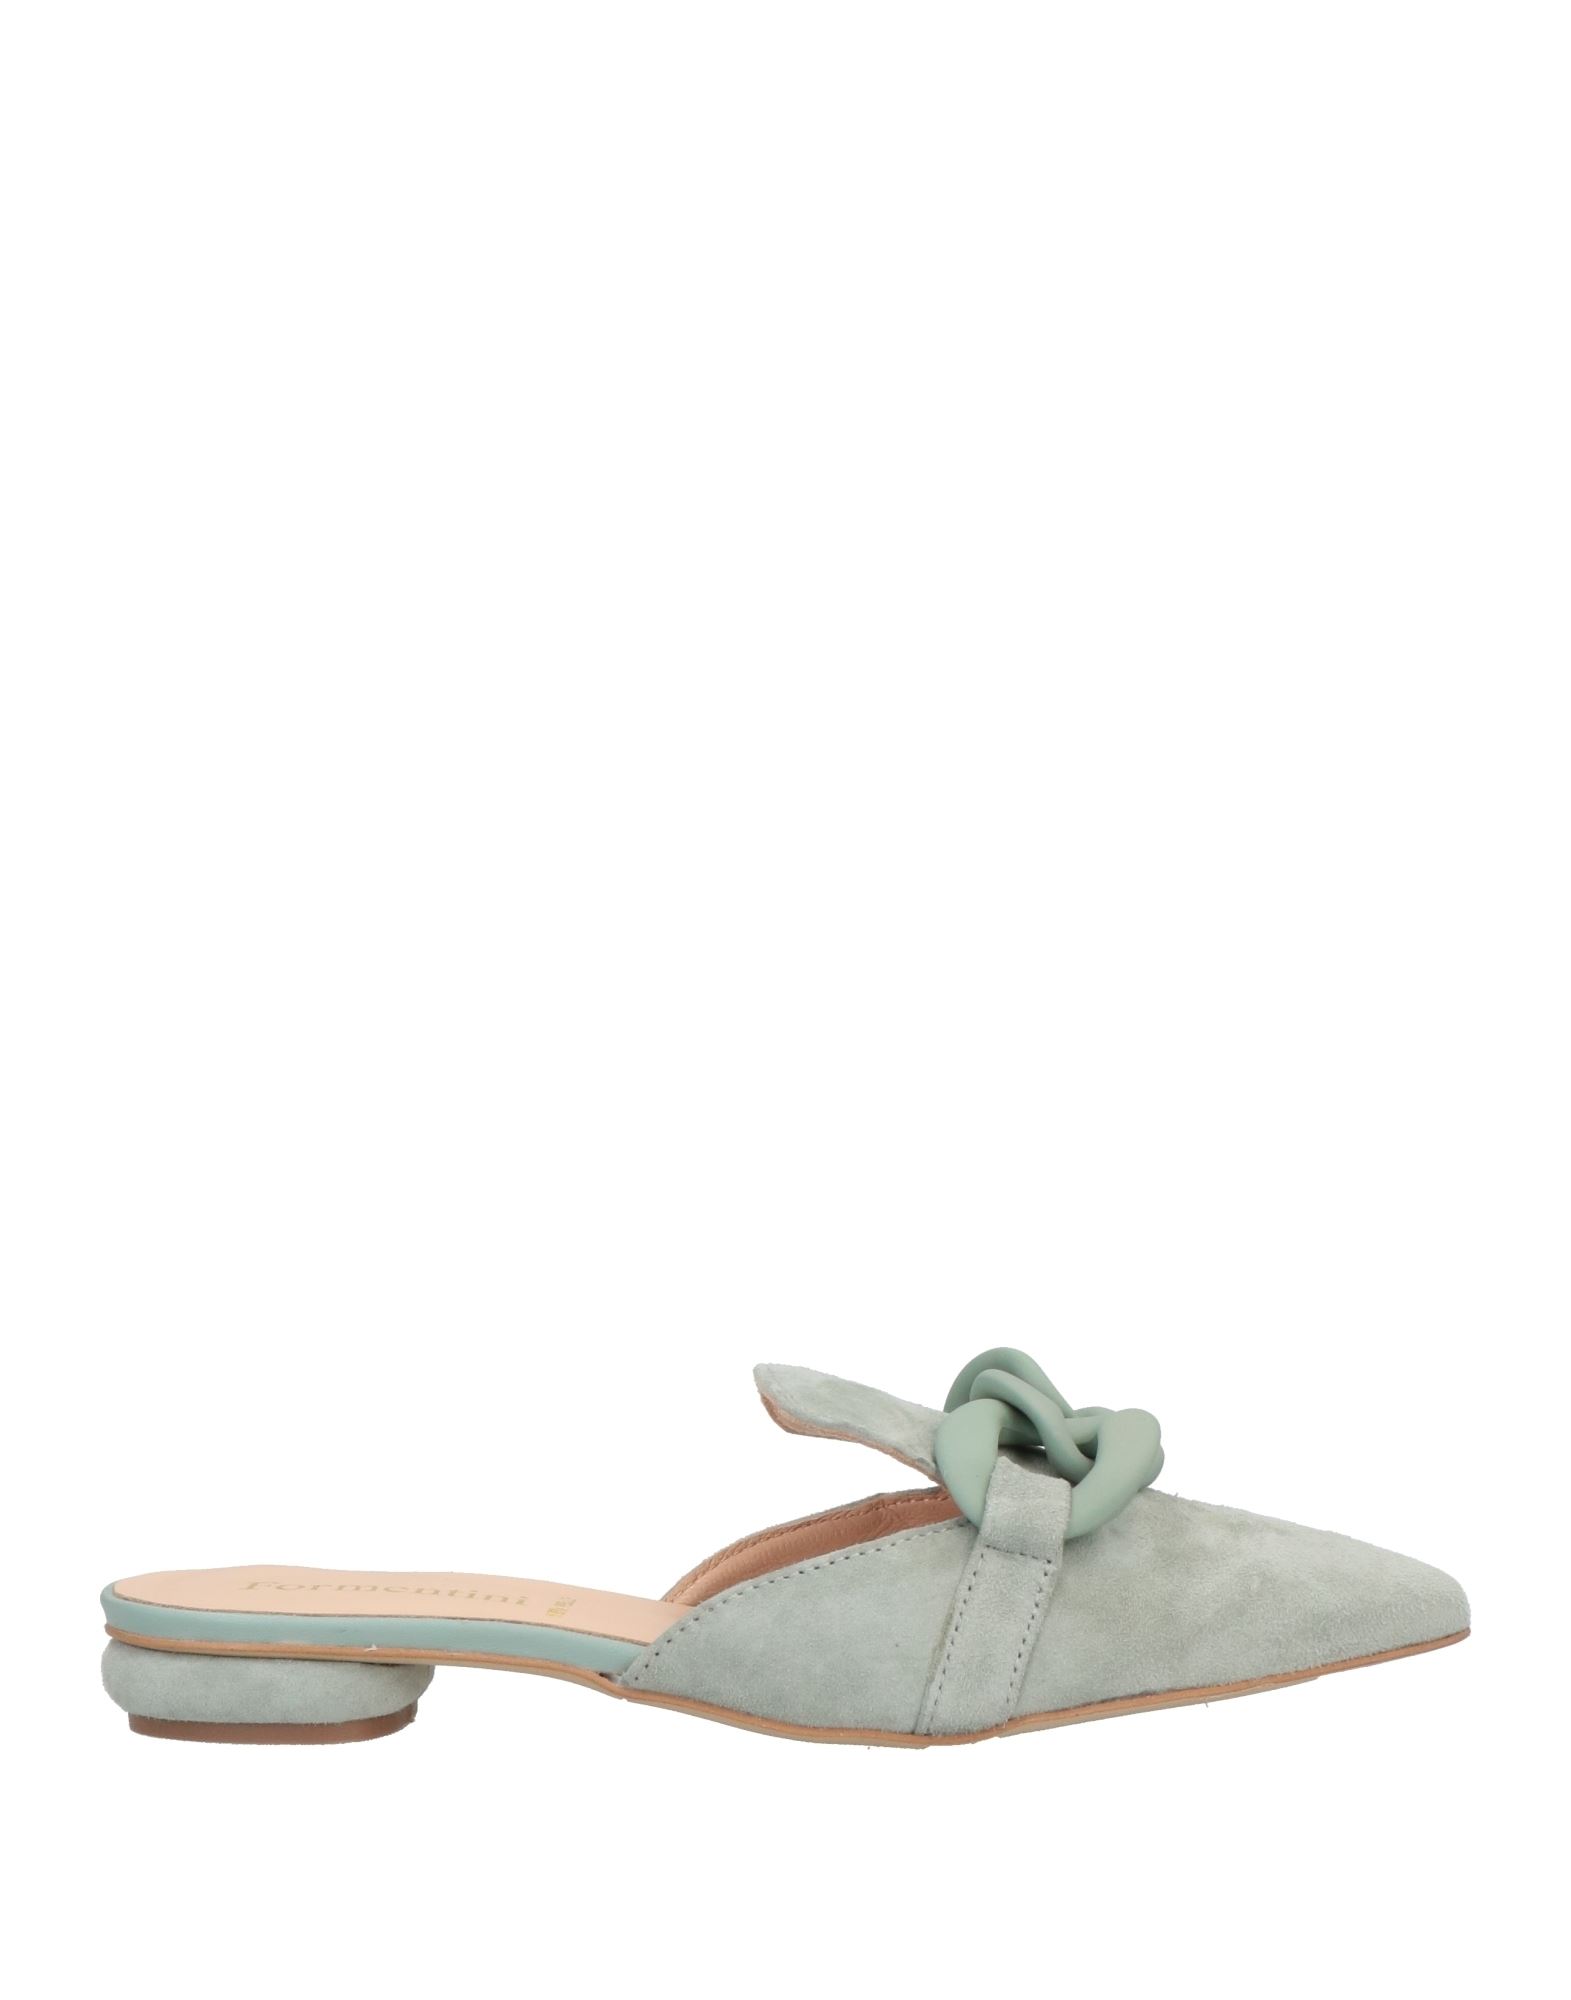 Formentini Woman Mules & Clogs Sage Green Size 6 Soft Leather